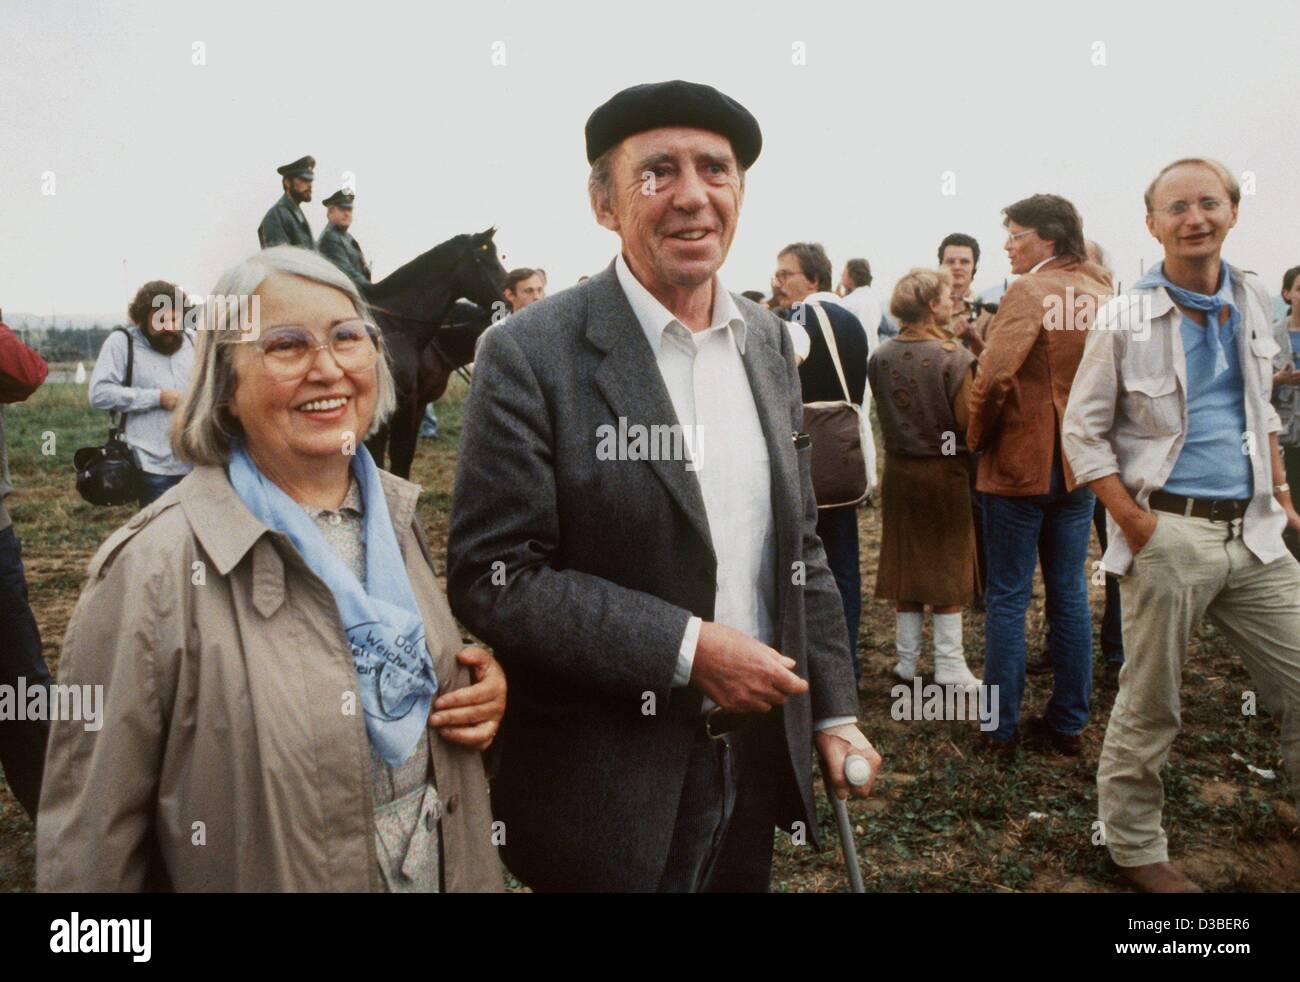 (dpa files) - German author Heinrich Boell (C) and his wife (L)  among protesters during a rally in Mutlangen, West Germany, 1 September 1983. Boell was born 21 December 1917 in Cologne and died in Kreuzau, West Germany, 16 July 1985. In 1962 he received the Buechner Award and in 1972 the Noble Priz Stock Photo